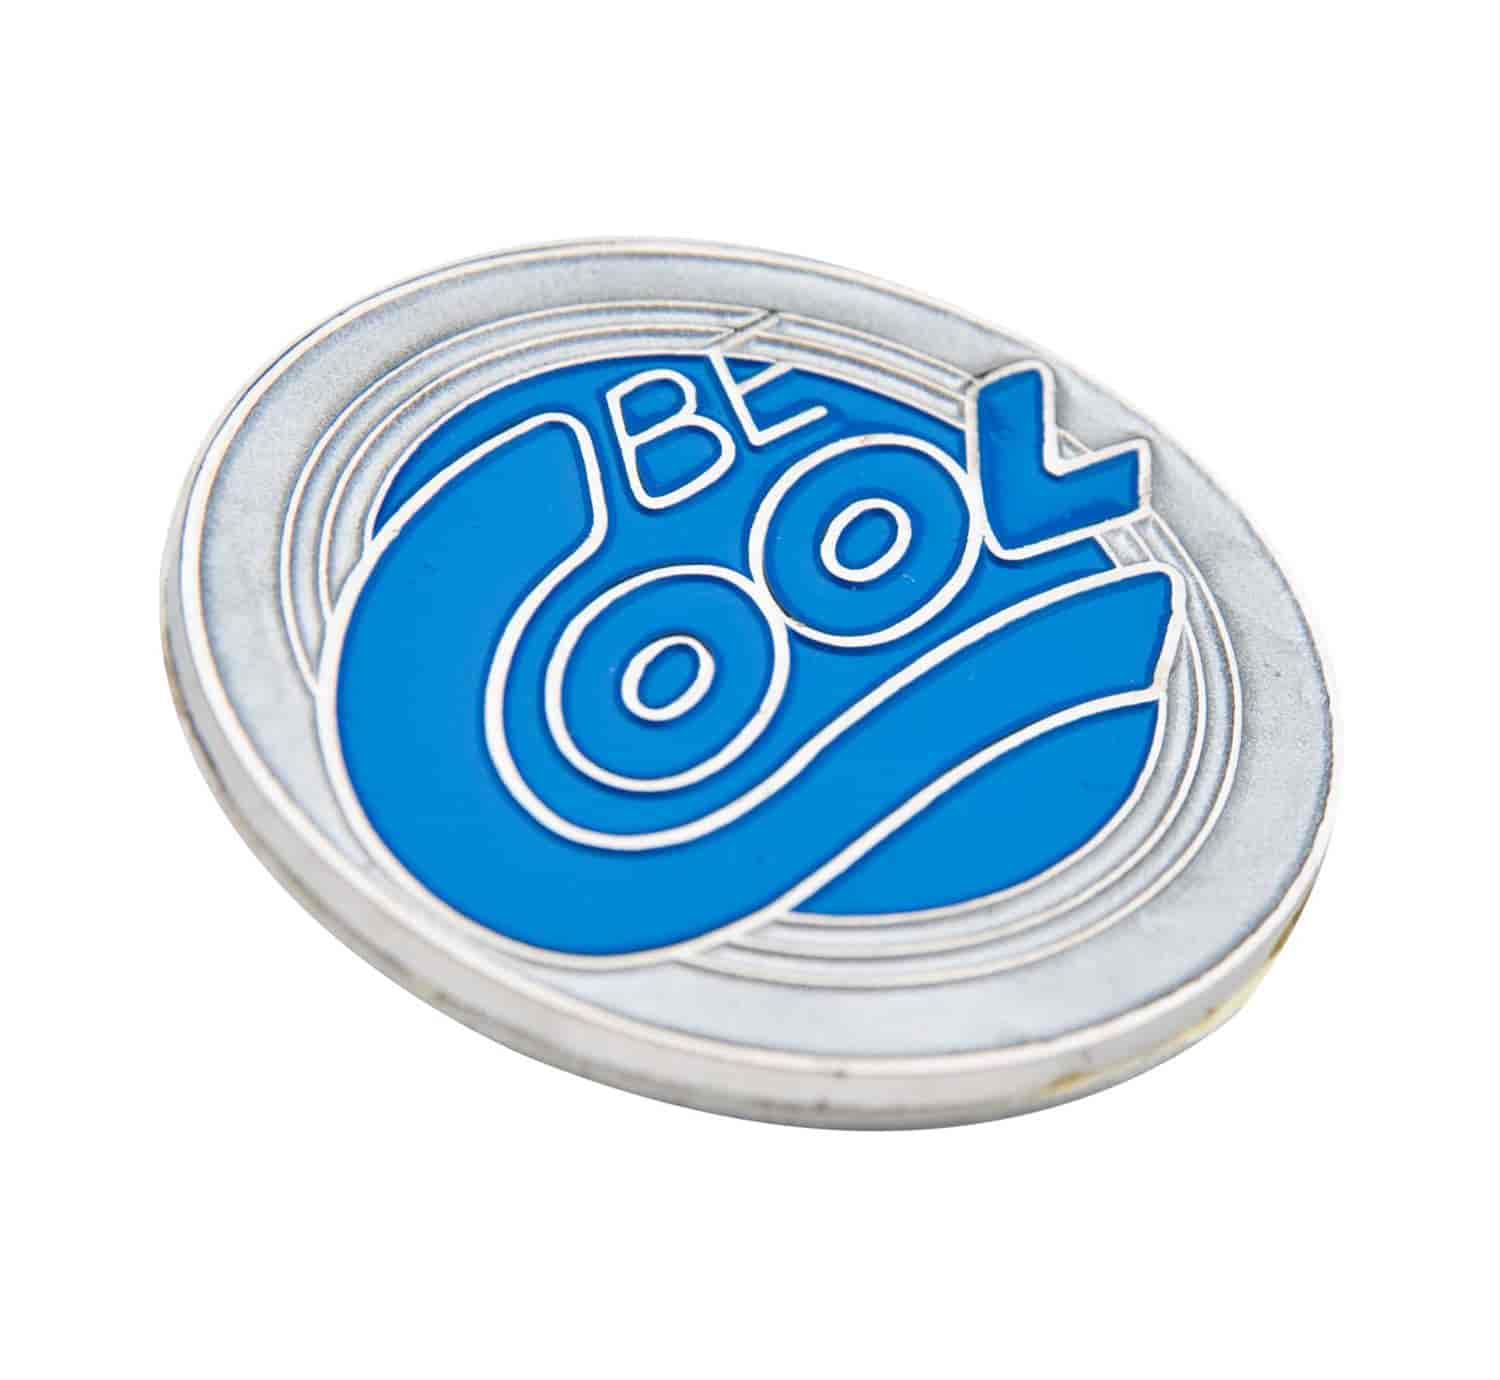 Be Cool Embossed Emblem 1-3/4" Round